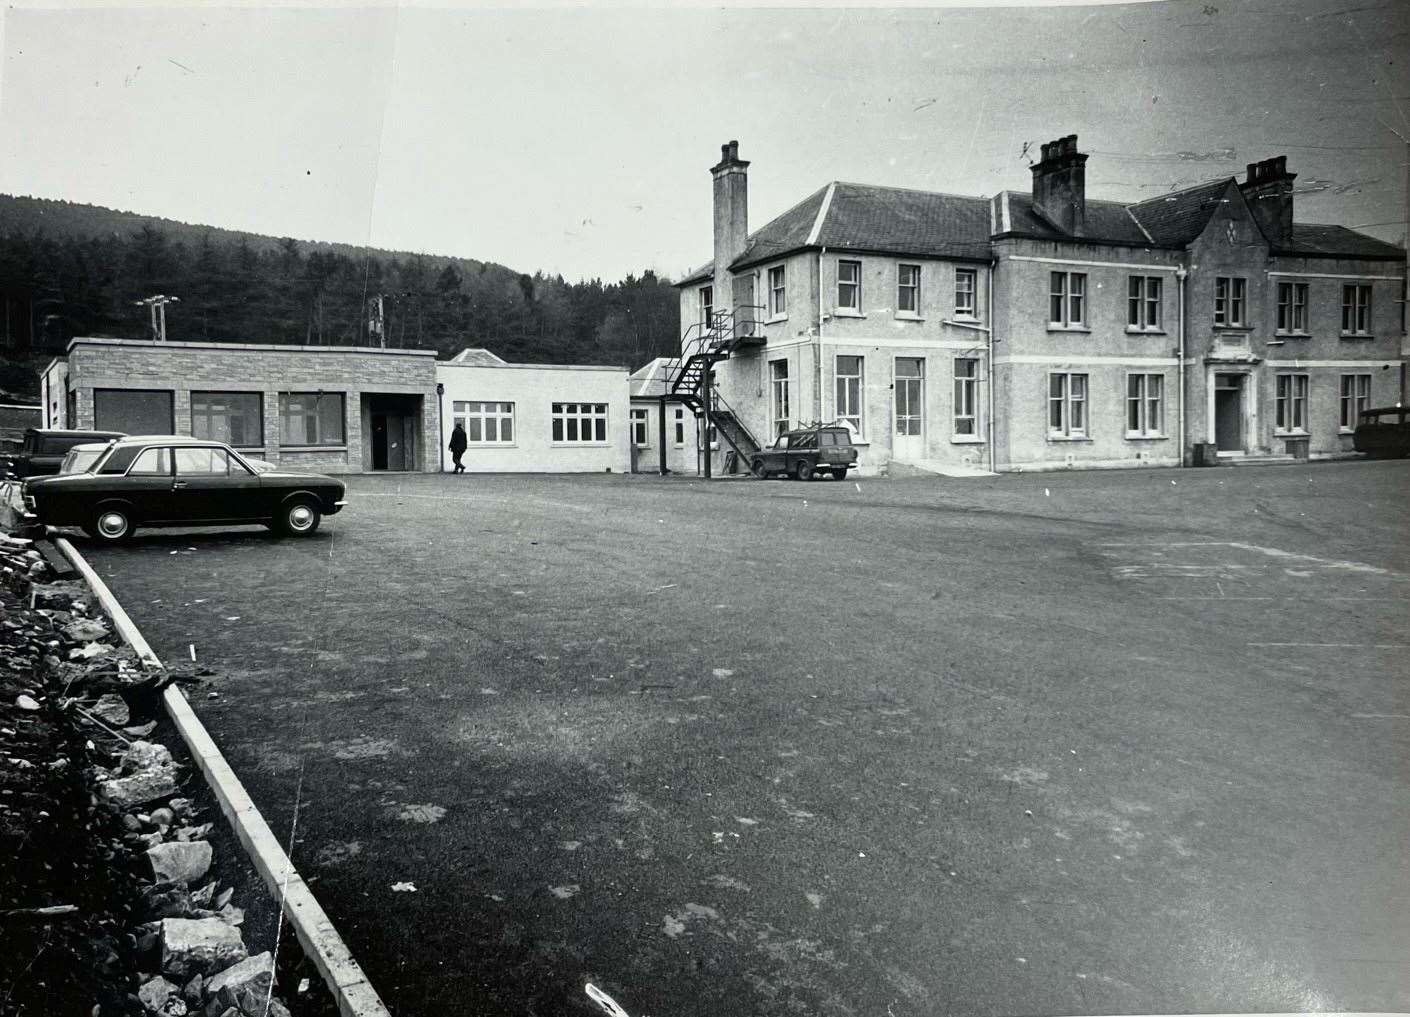 The Lawson Memorial Hospital at Golspie opened on July 27, 1900.